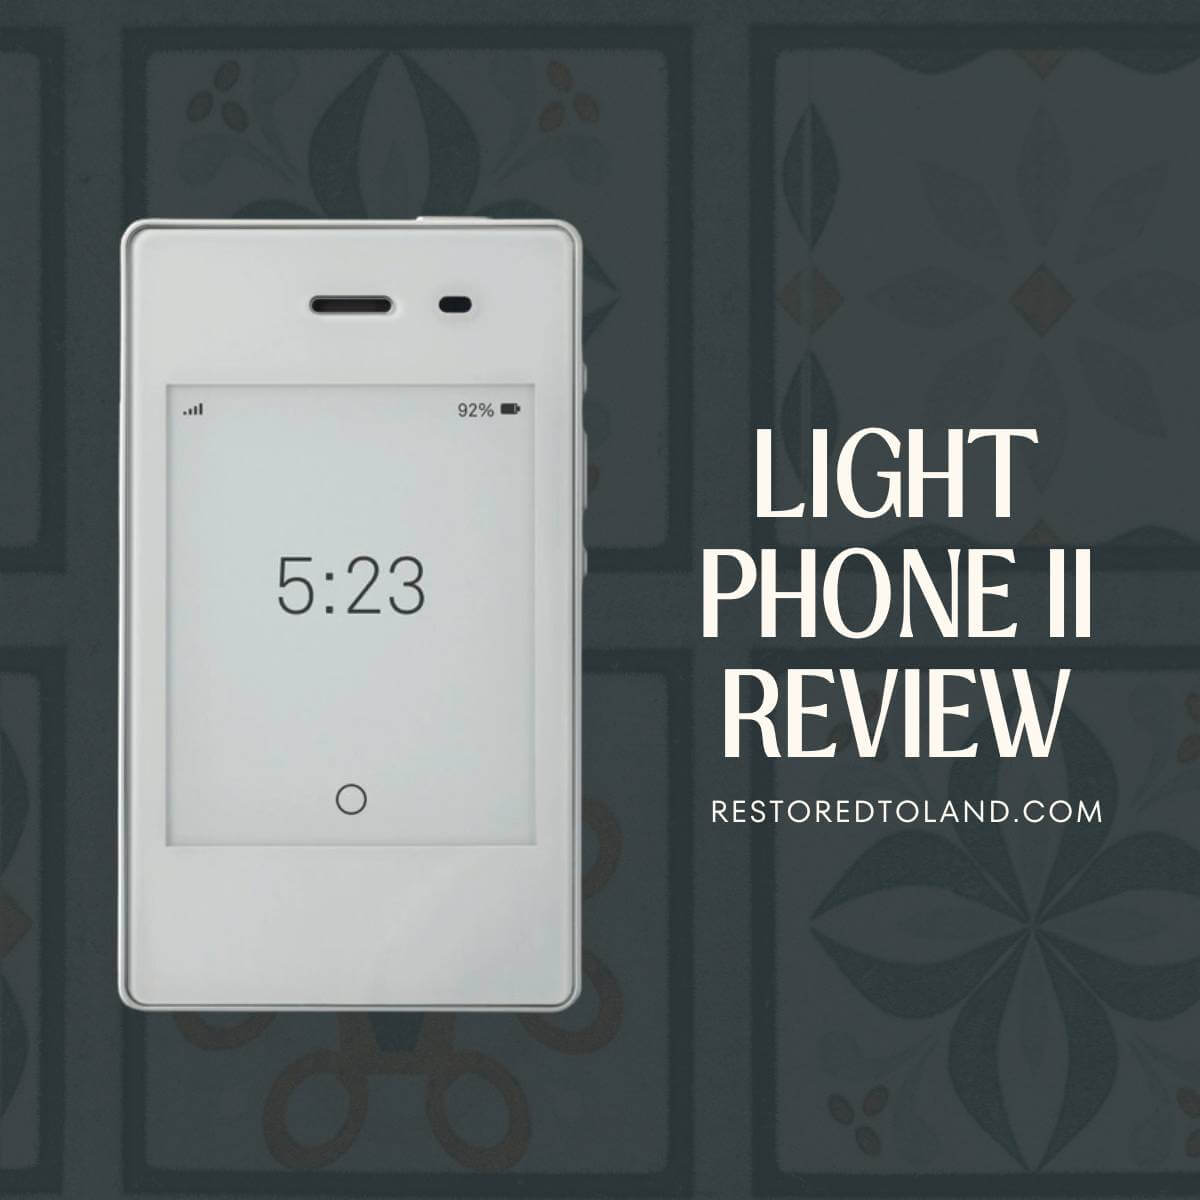 image of a light phone ii next to the text "light phone ii review"